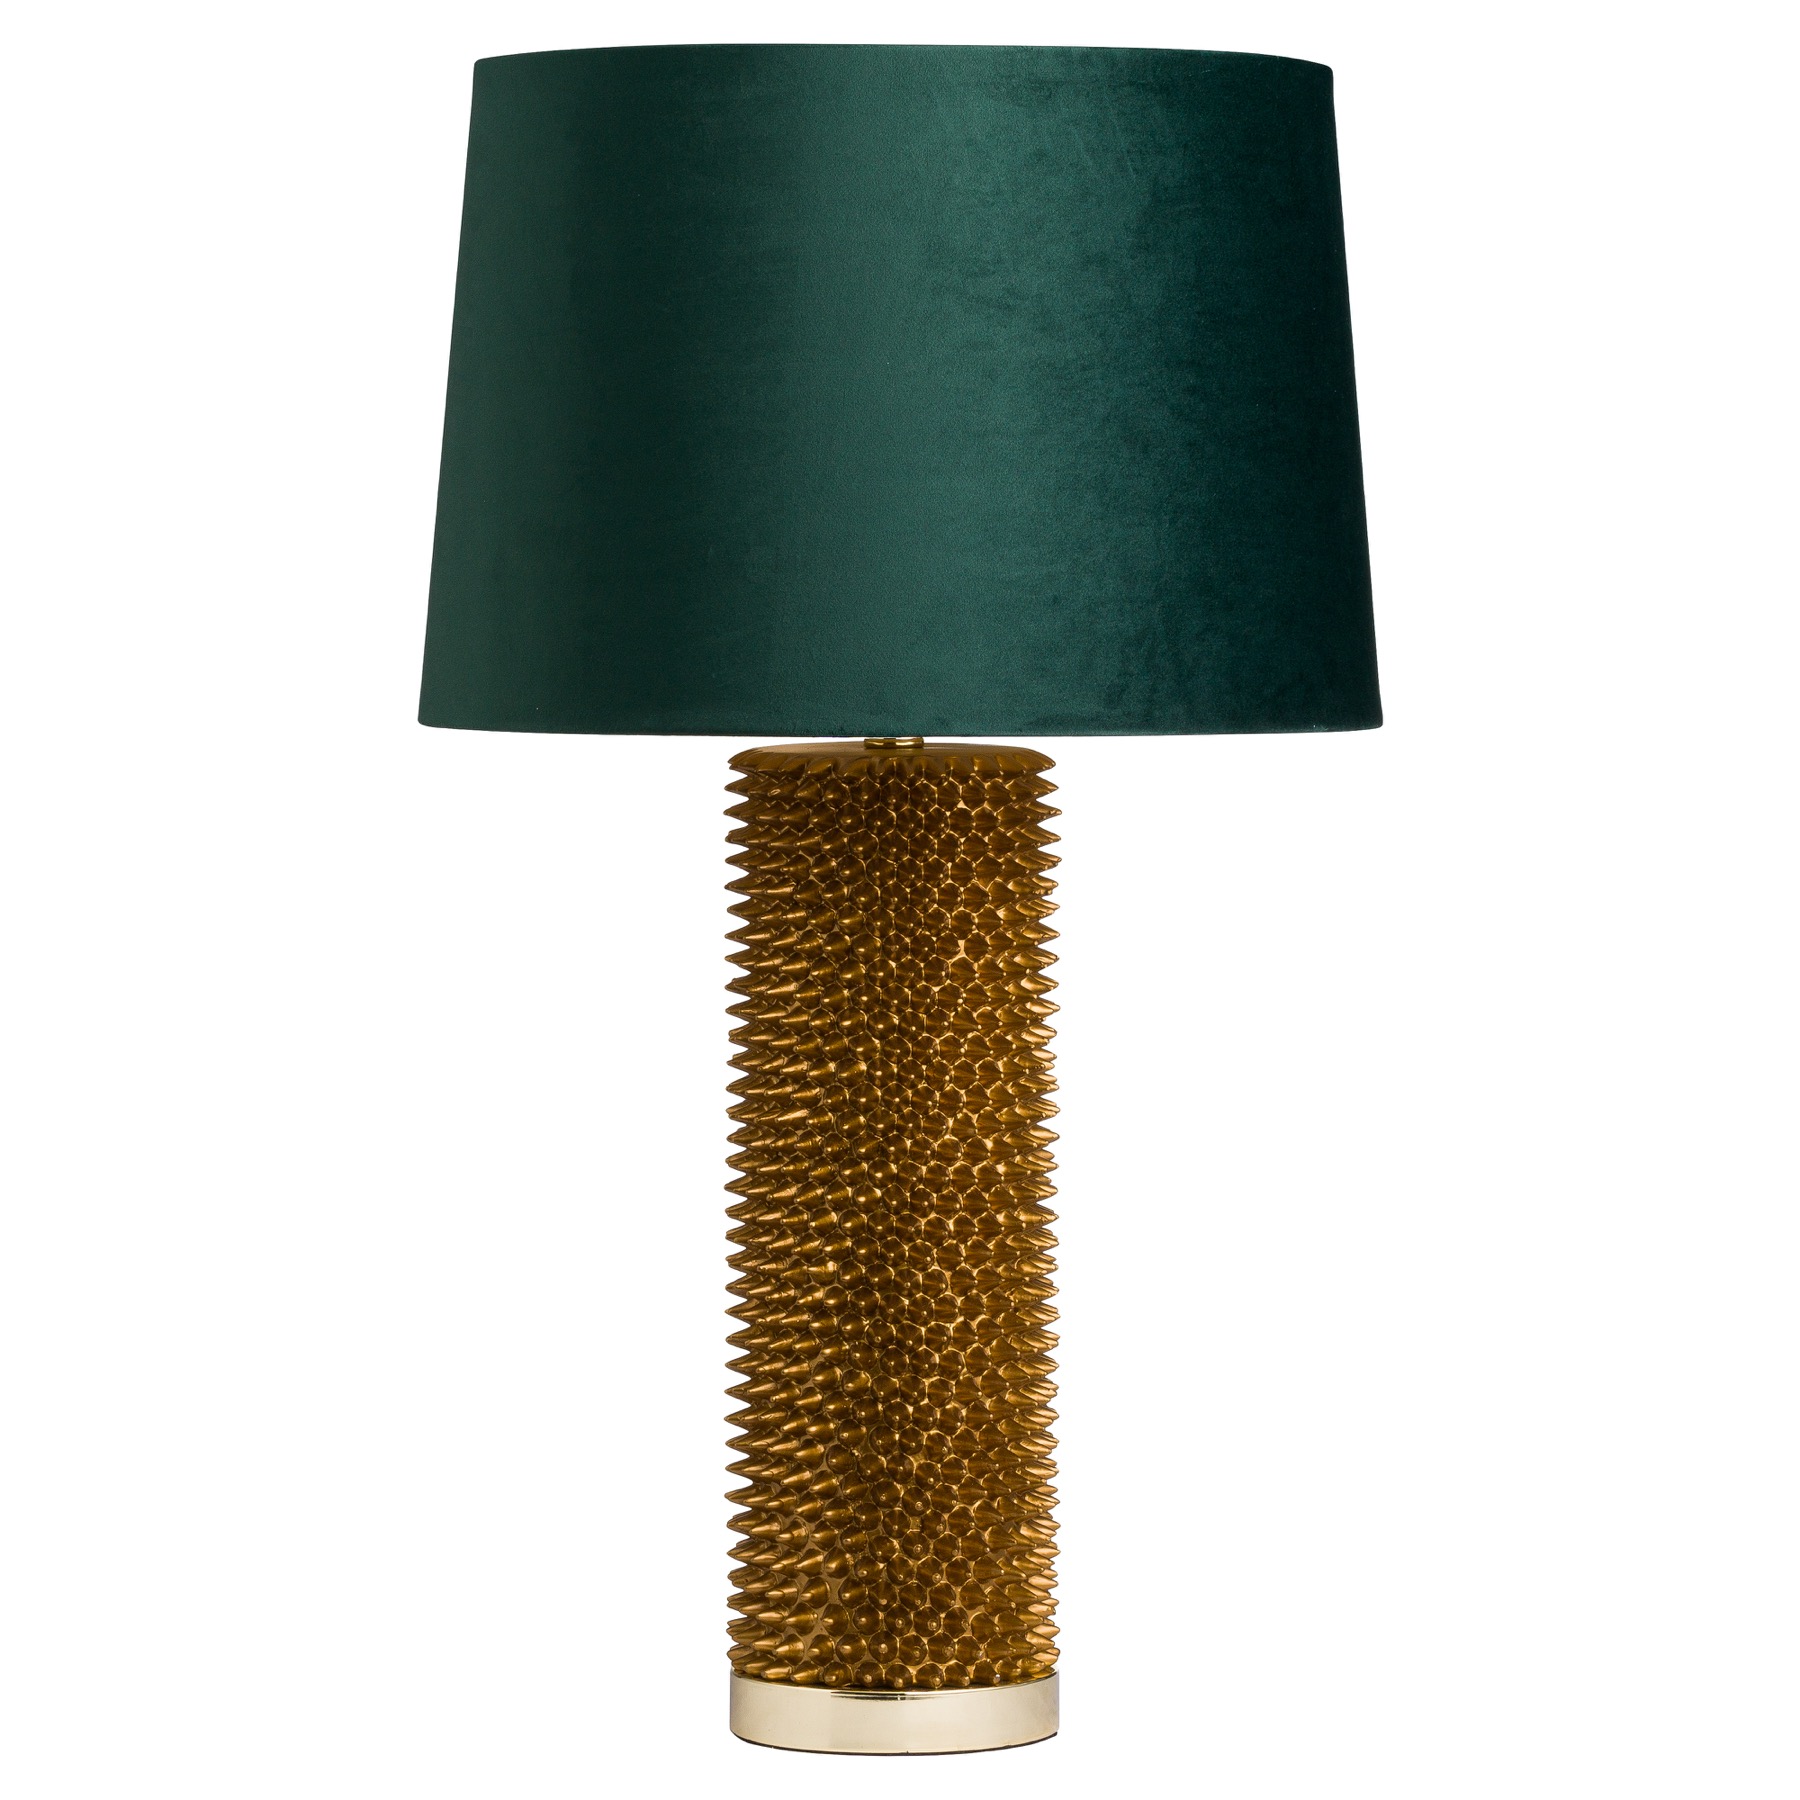 Antique Gold Acantho Table Lamp With Emerald Velvet Shade - Image 1